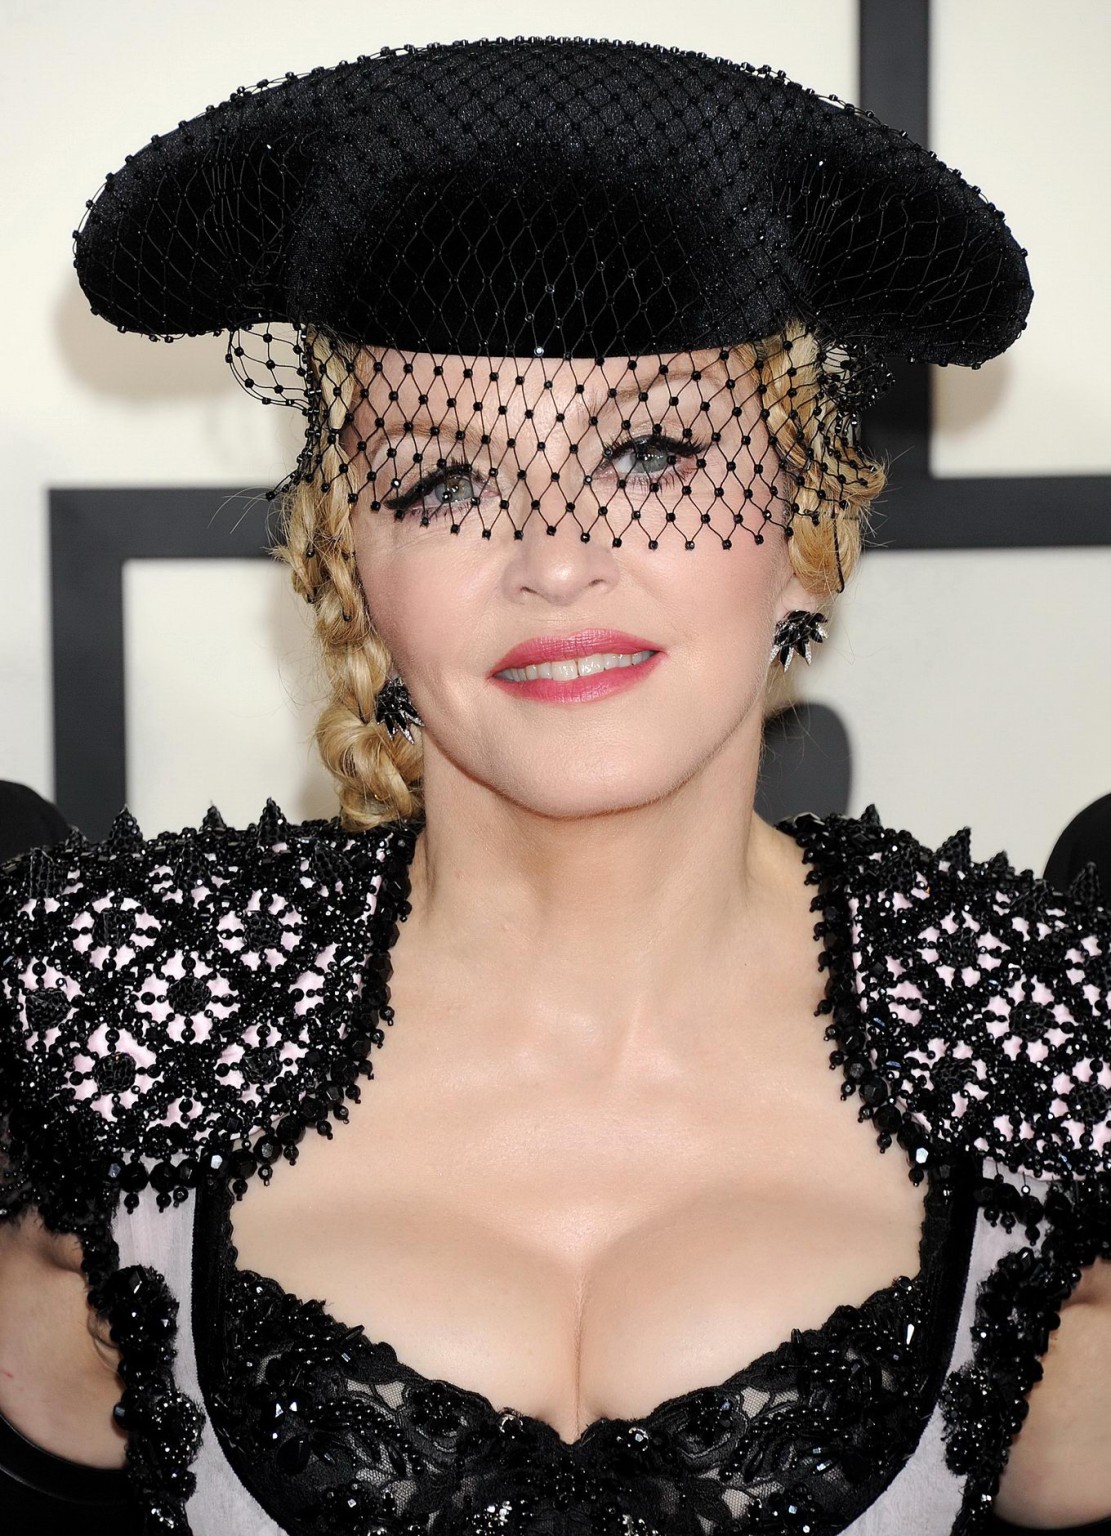 Madonna cleavy wearing a slutty outfit at the 57th Annual GRAMMY Awards in LA #75172996